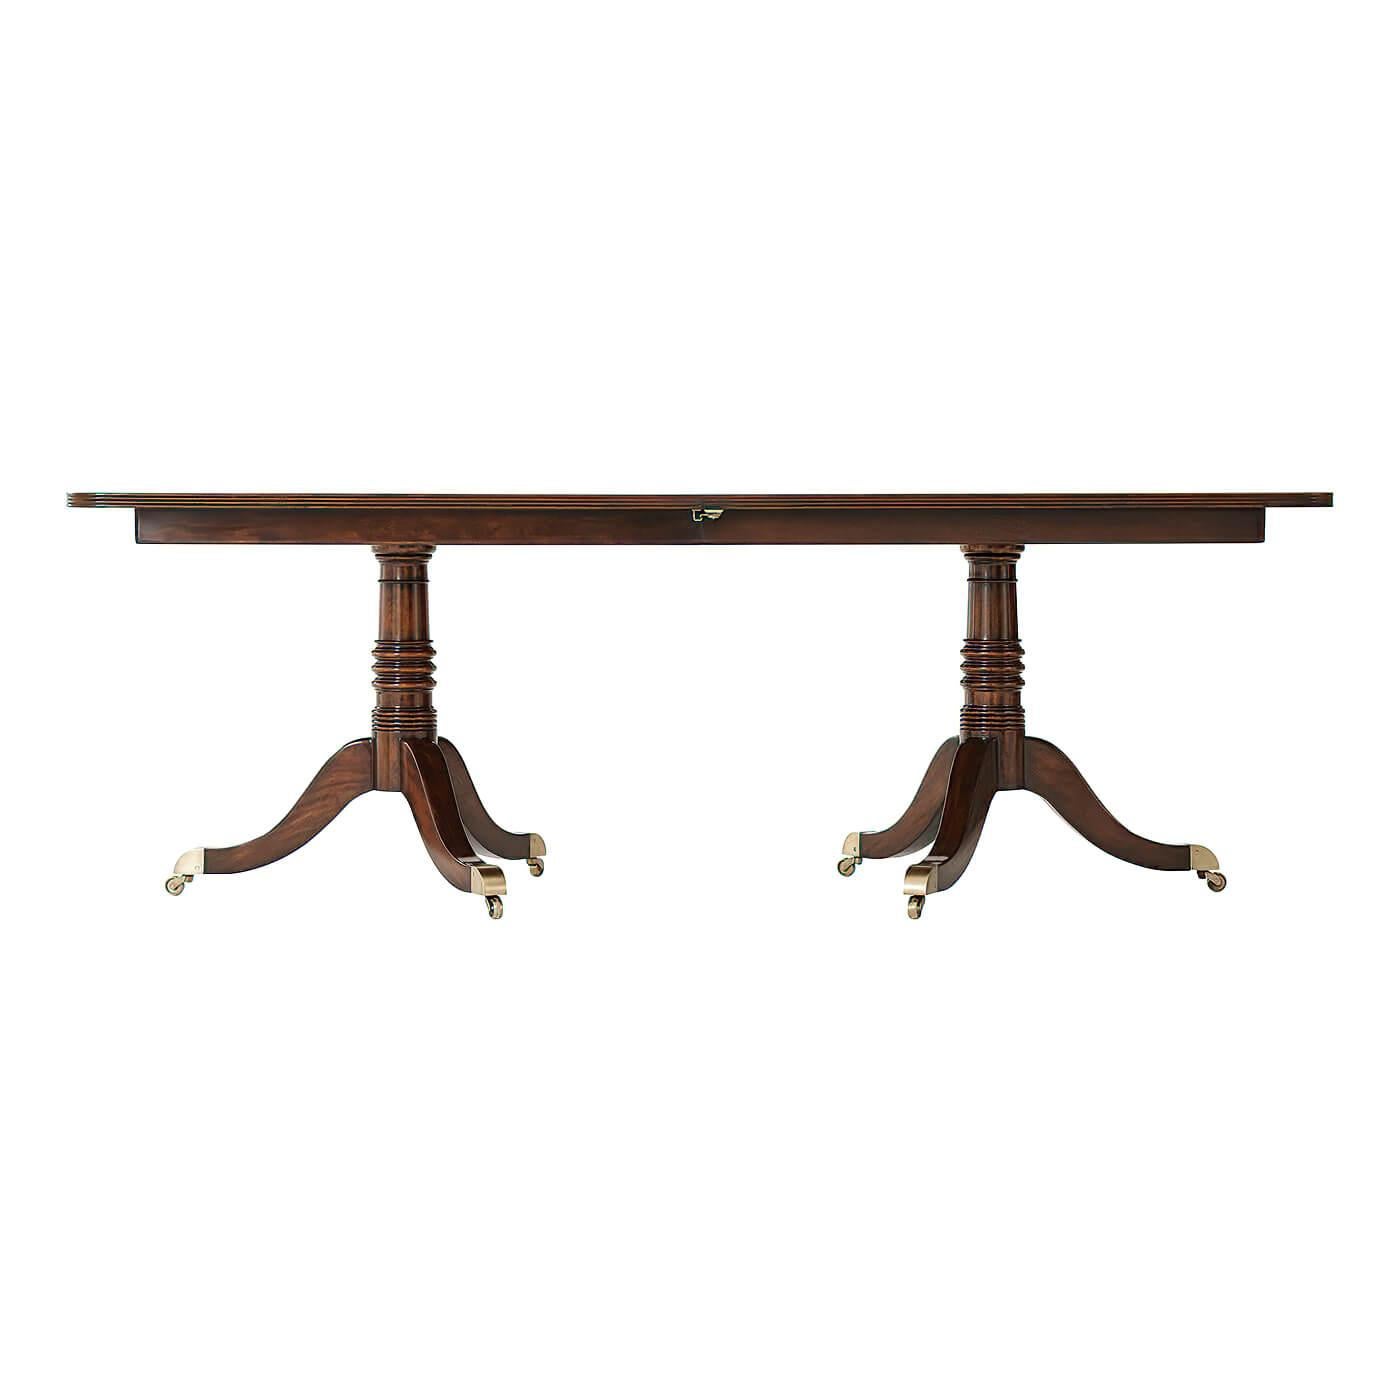 Vietnamese Regency Extension Mahogany Dining Table For Sale